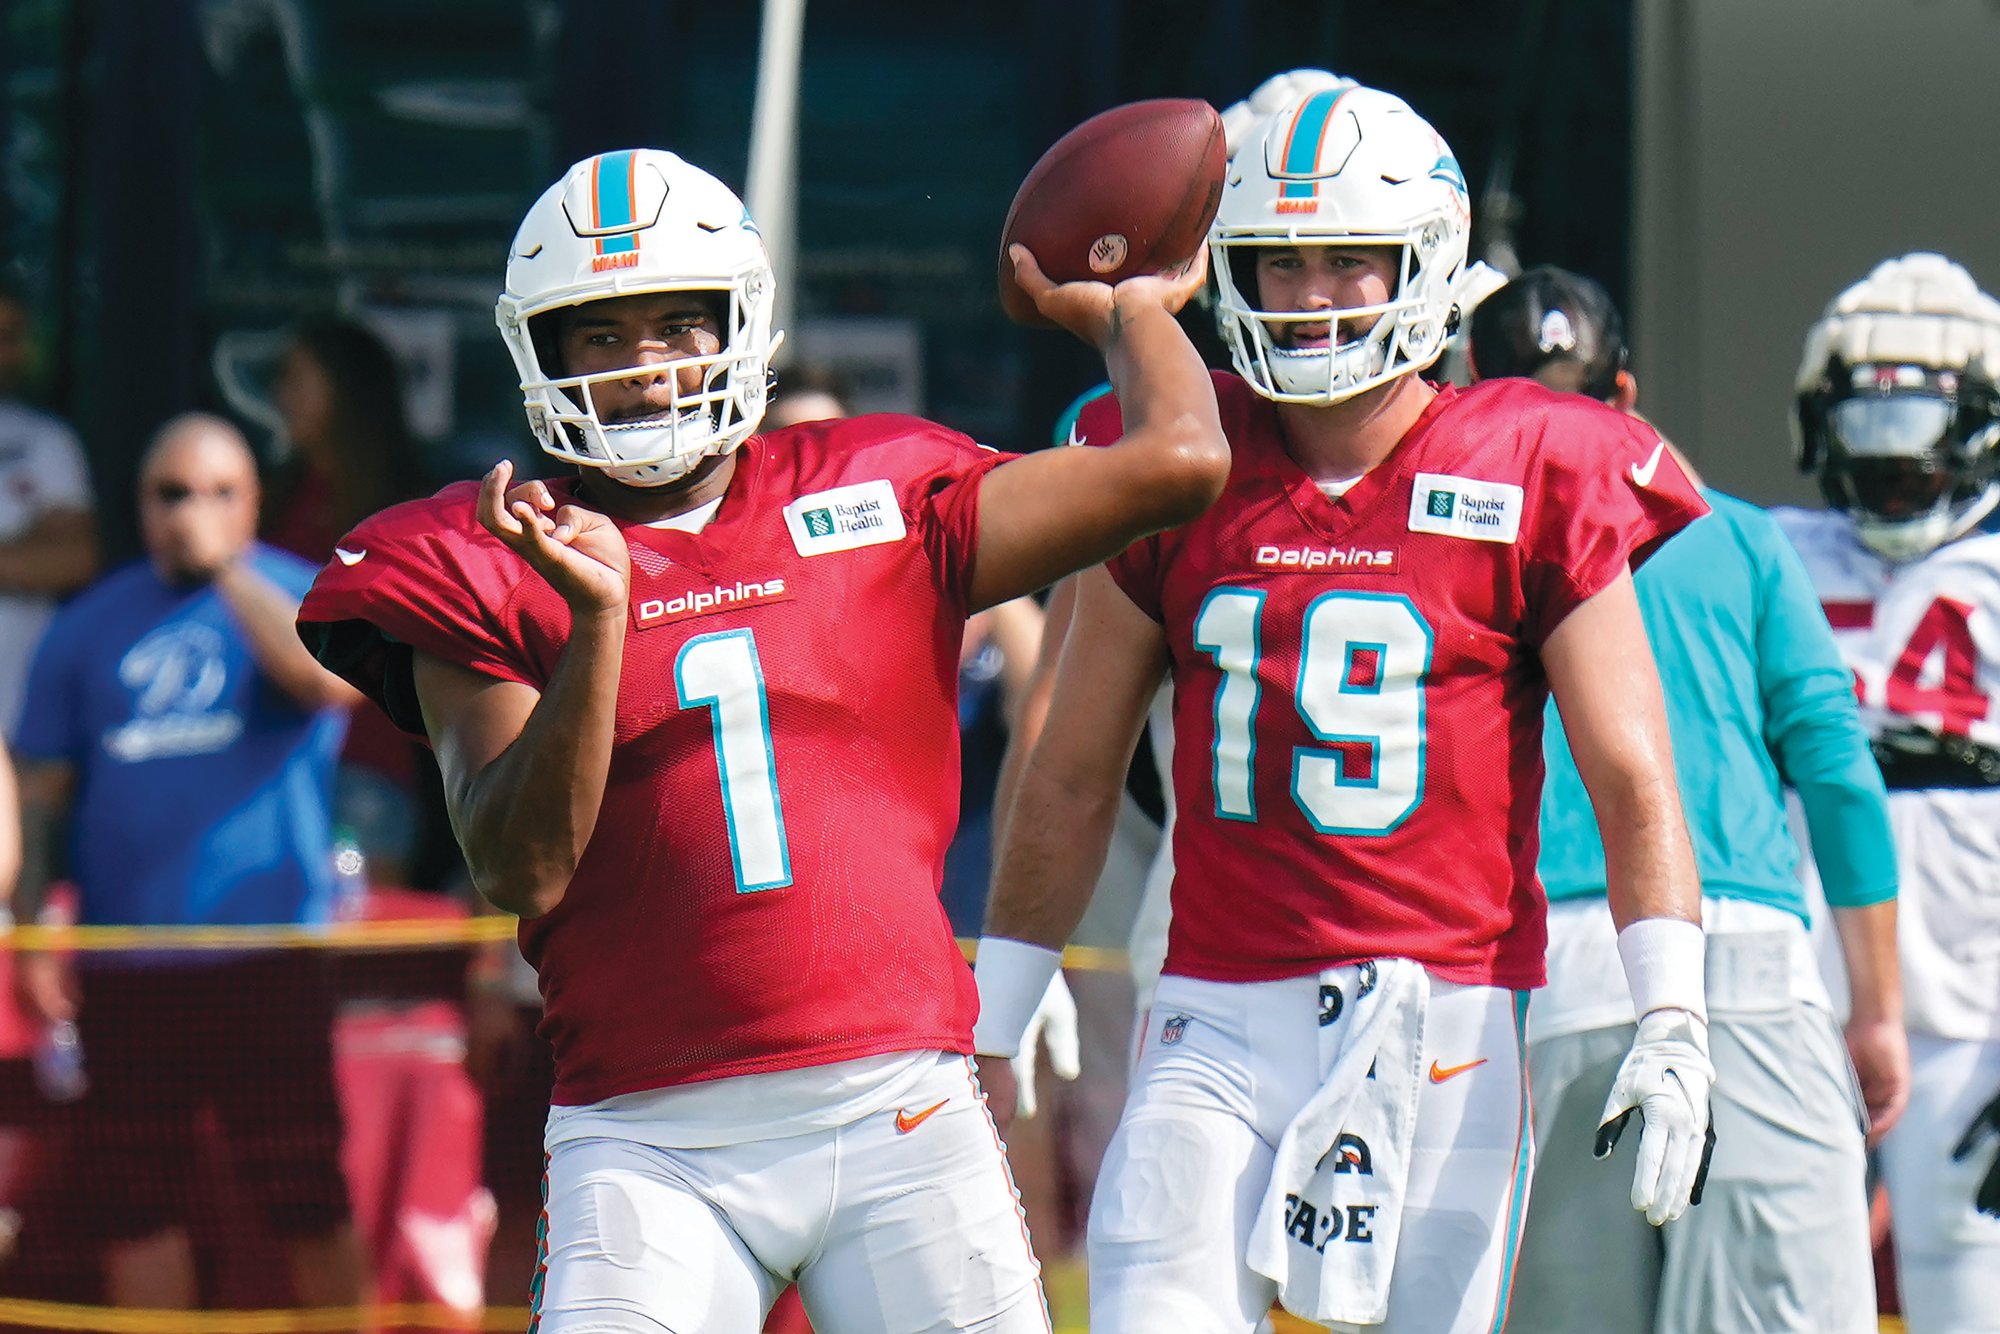 Miami Dolphins quarterback Tua Tagovailoa (1) throws a pass during training camp on Wednesday in Tampa, Florida.